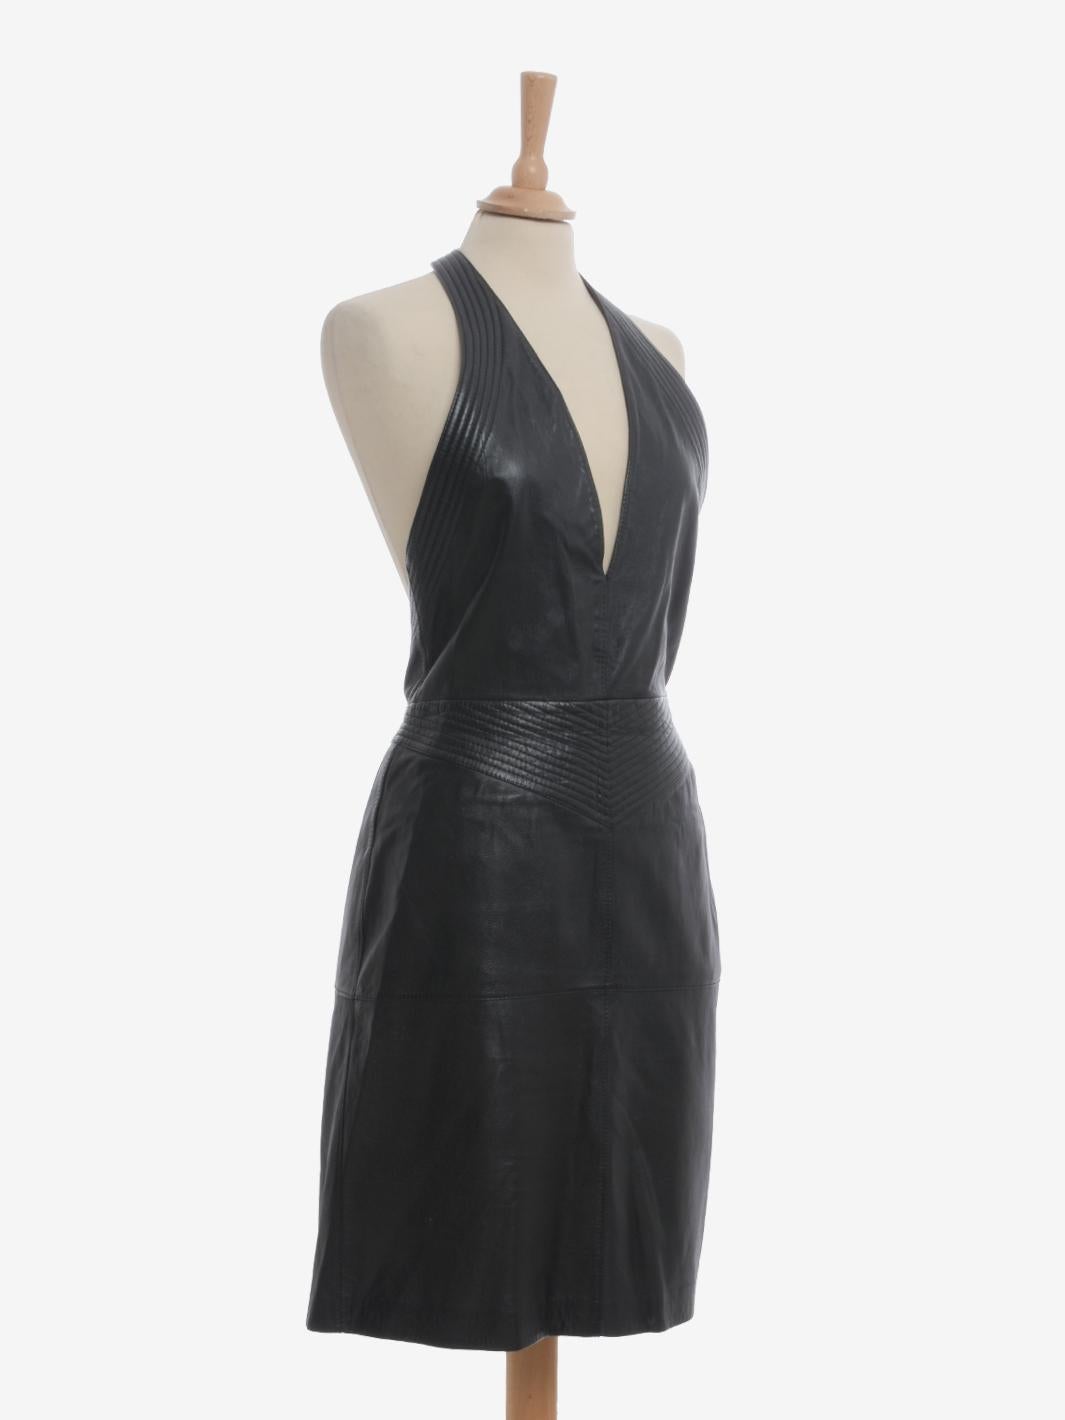 Gianfranco Ferré Leather Midi Dress - 80s In Excellent Condition For Sale In Milano, IT